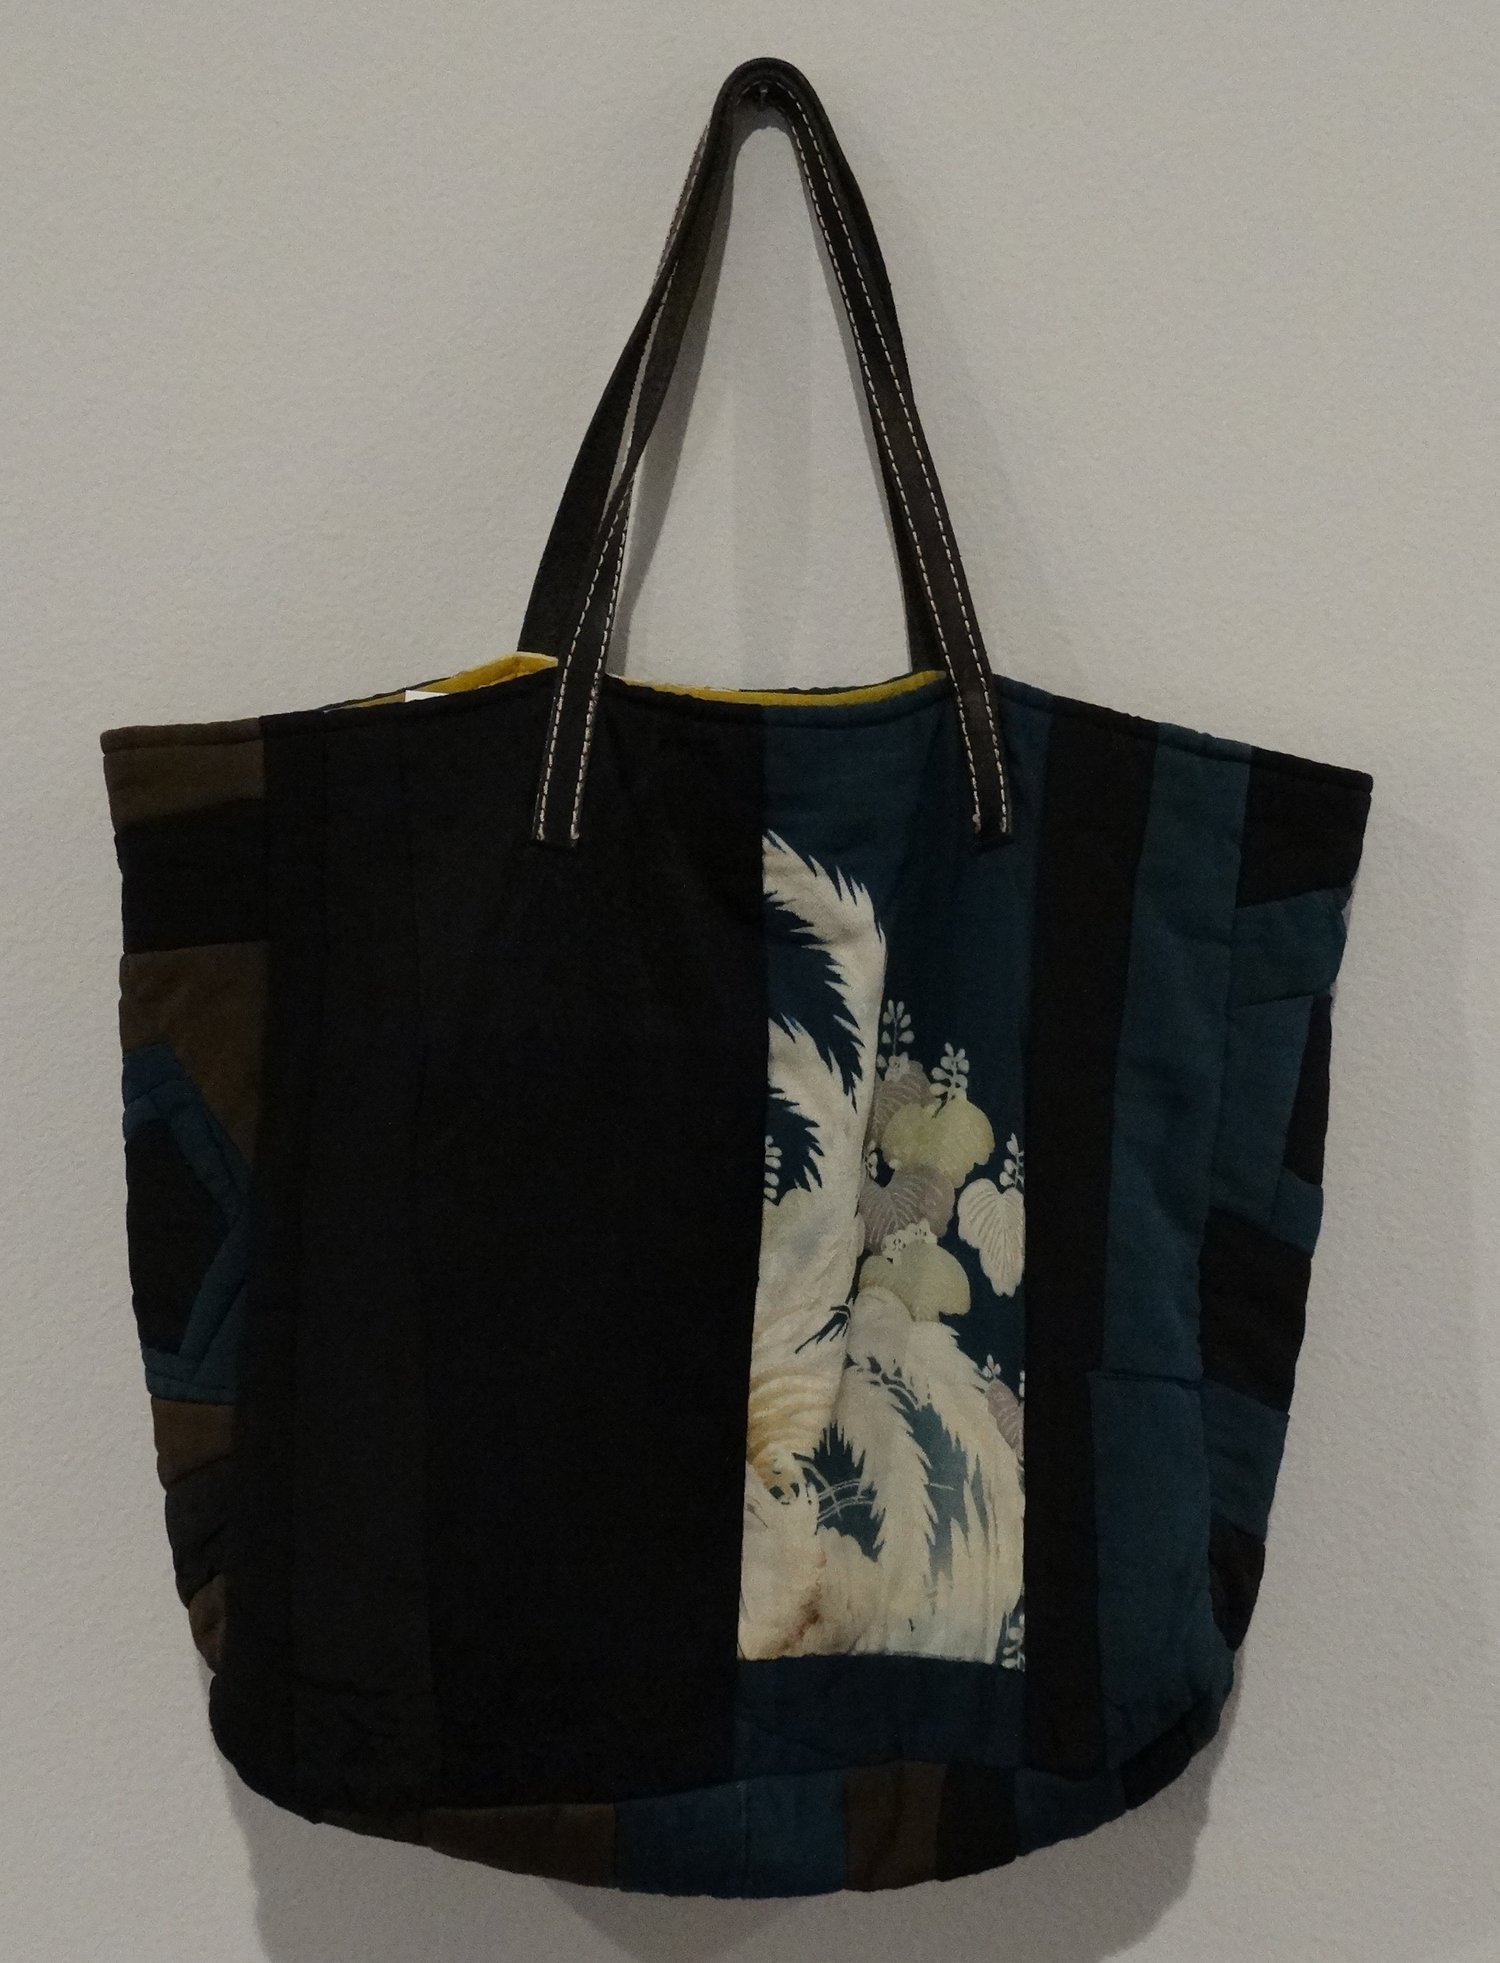 Tote bag. Vintage Japanese kimono fabric with a red bonded denim